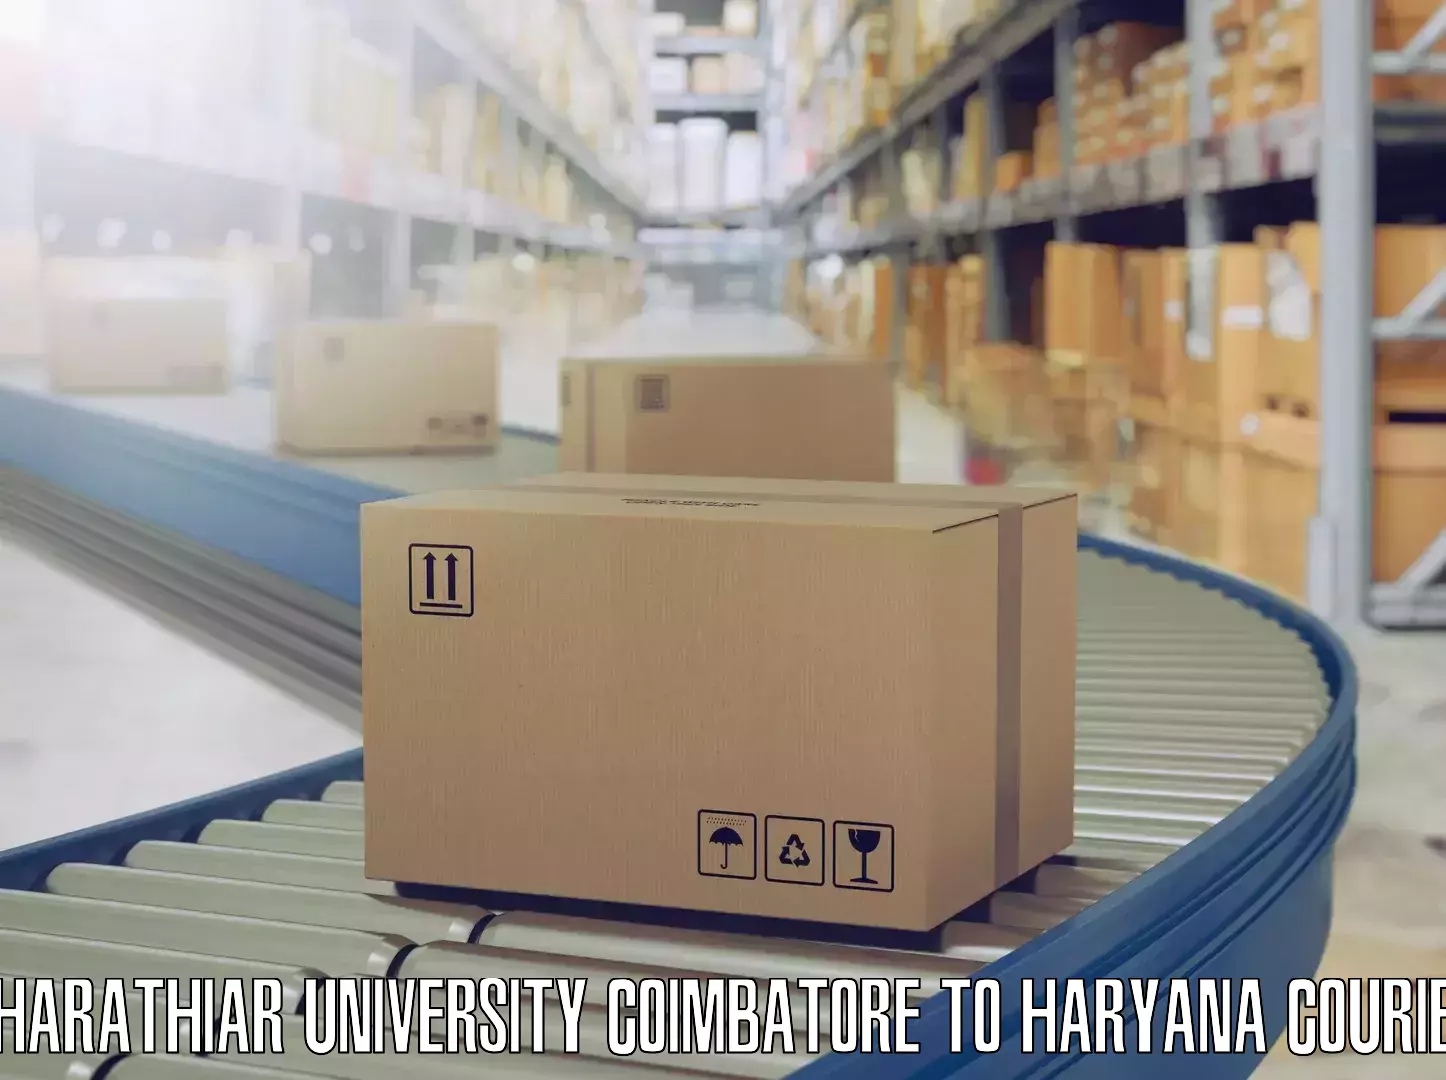 Furniture delivery service Bharathiar University Coimbatore to Chaudhary Charan Singh Haryana Agricultural University Hisar